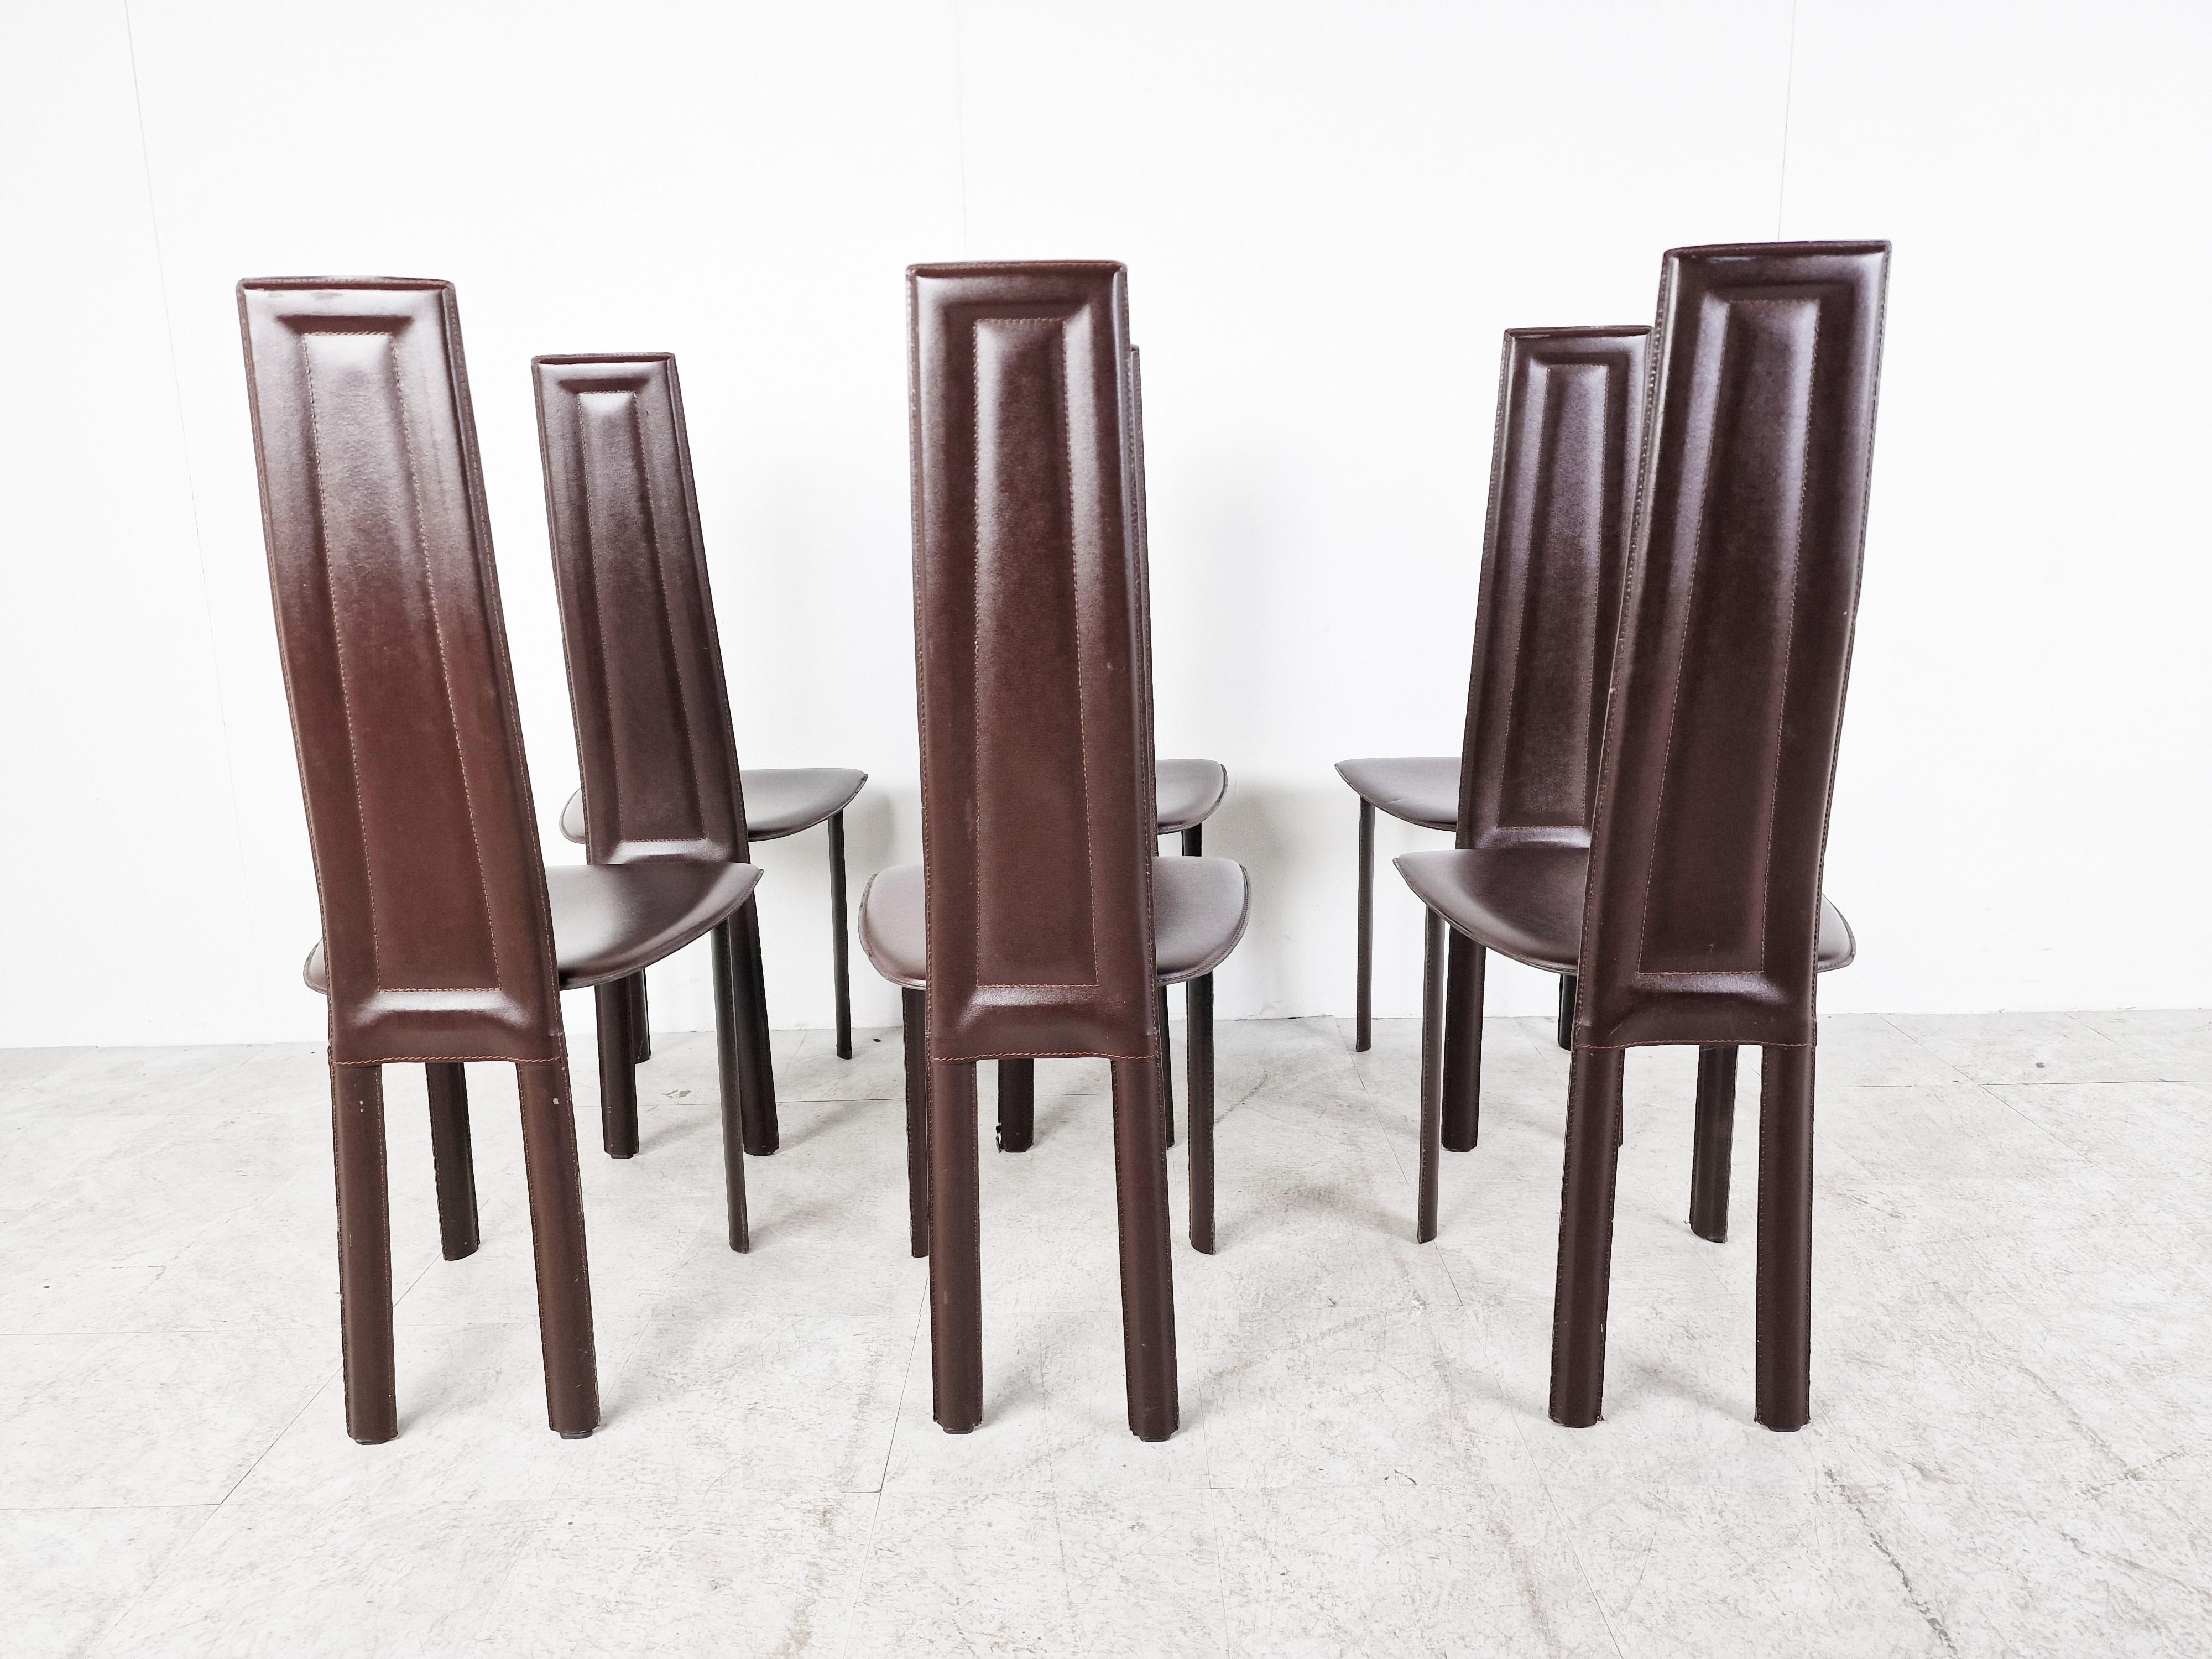 Set of 6 dark brown italian leather high back dining chairs.

beautiful sleek and timeless design.

The chairs are in fair condition with minimal wear.

1980s - Italy

Dimensions
height: 110cm/43.30